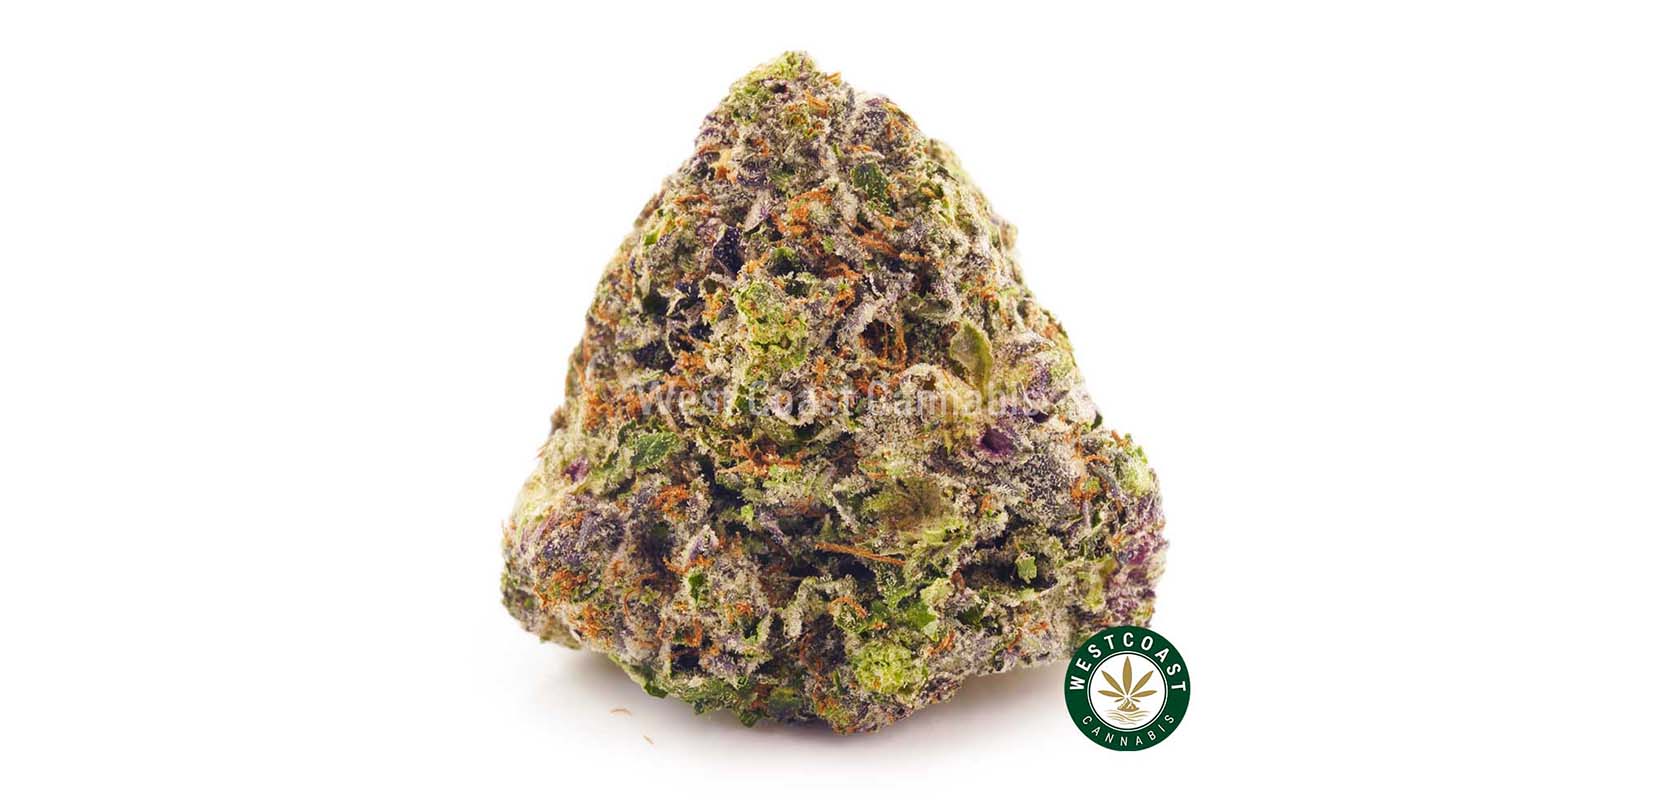 Large weed buds of space quees weed online from west coast cannabis canada. BC cannabis online dispensary for weed online.